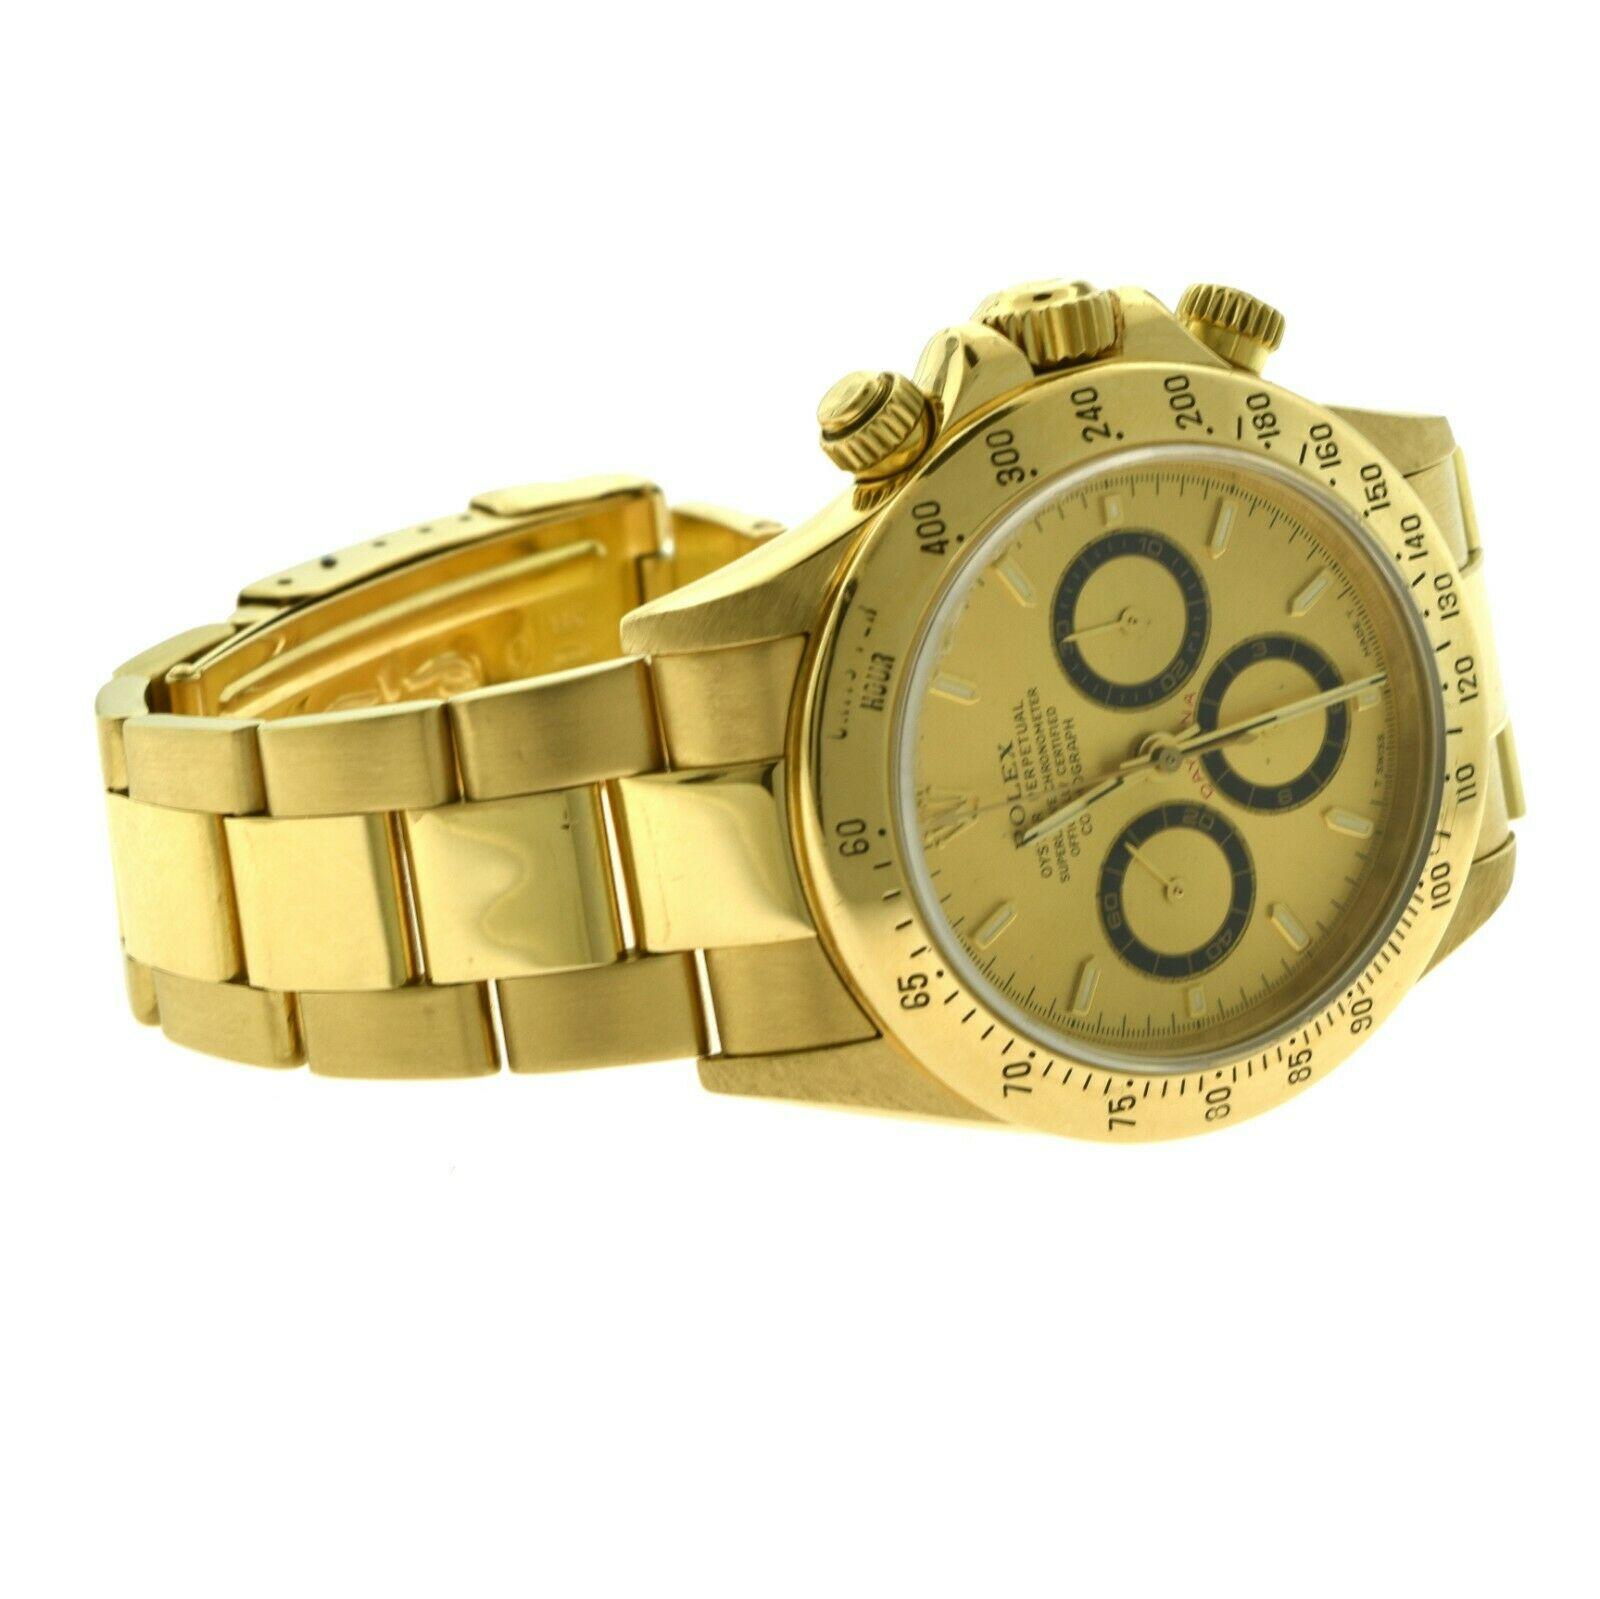 Brilliance Jewels, Miami
Questions? Call Us Anytime!
786,482,8100

Brand: Rolex

Model Name: Daytona

Model Number: 16528

Movement: Automatic

Case Size: 40 mm

Case Material: 18k Yellow Gold

Dial: Gold

Hour Markers: Stick Markers

Bracelet: 18k